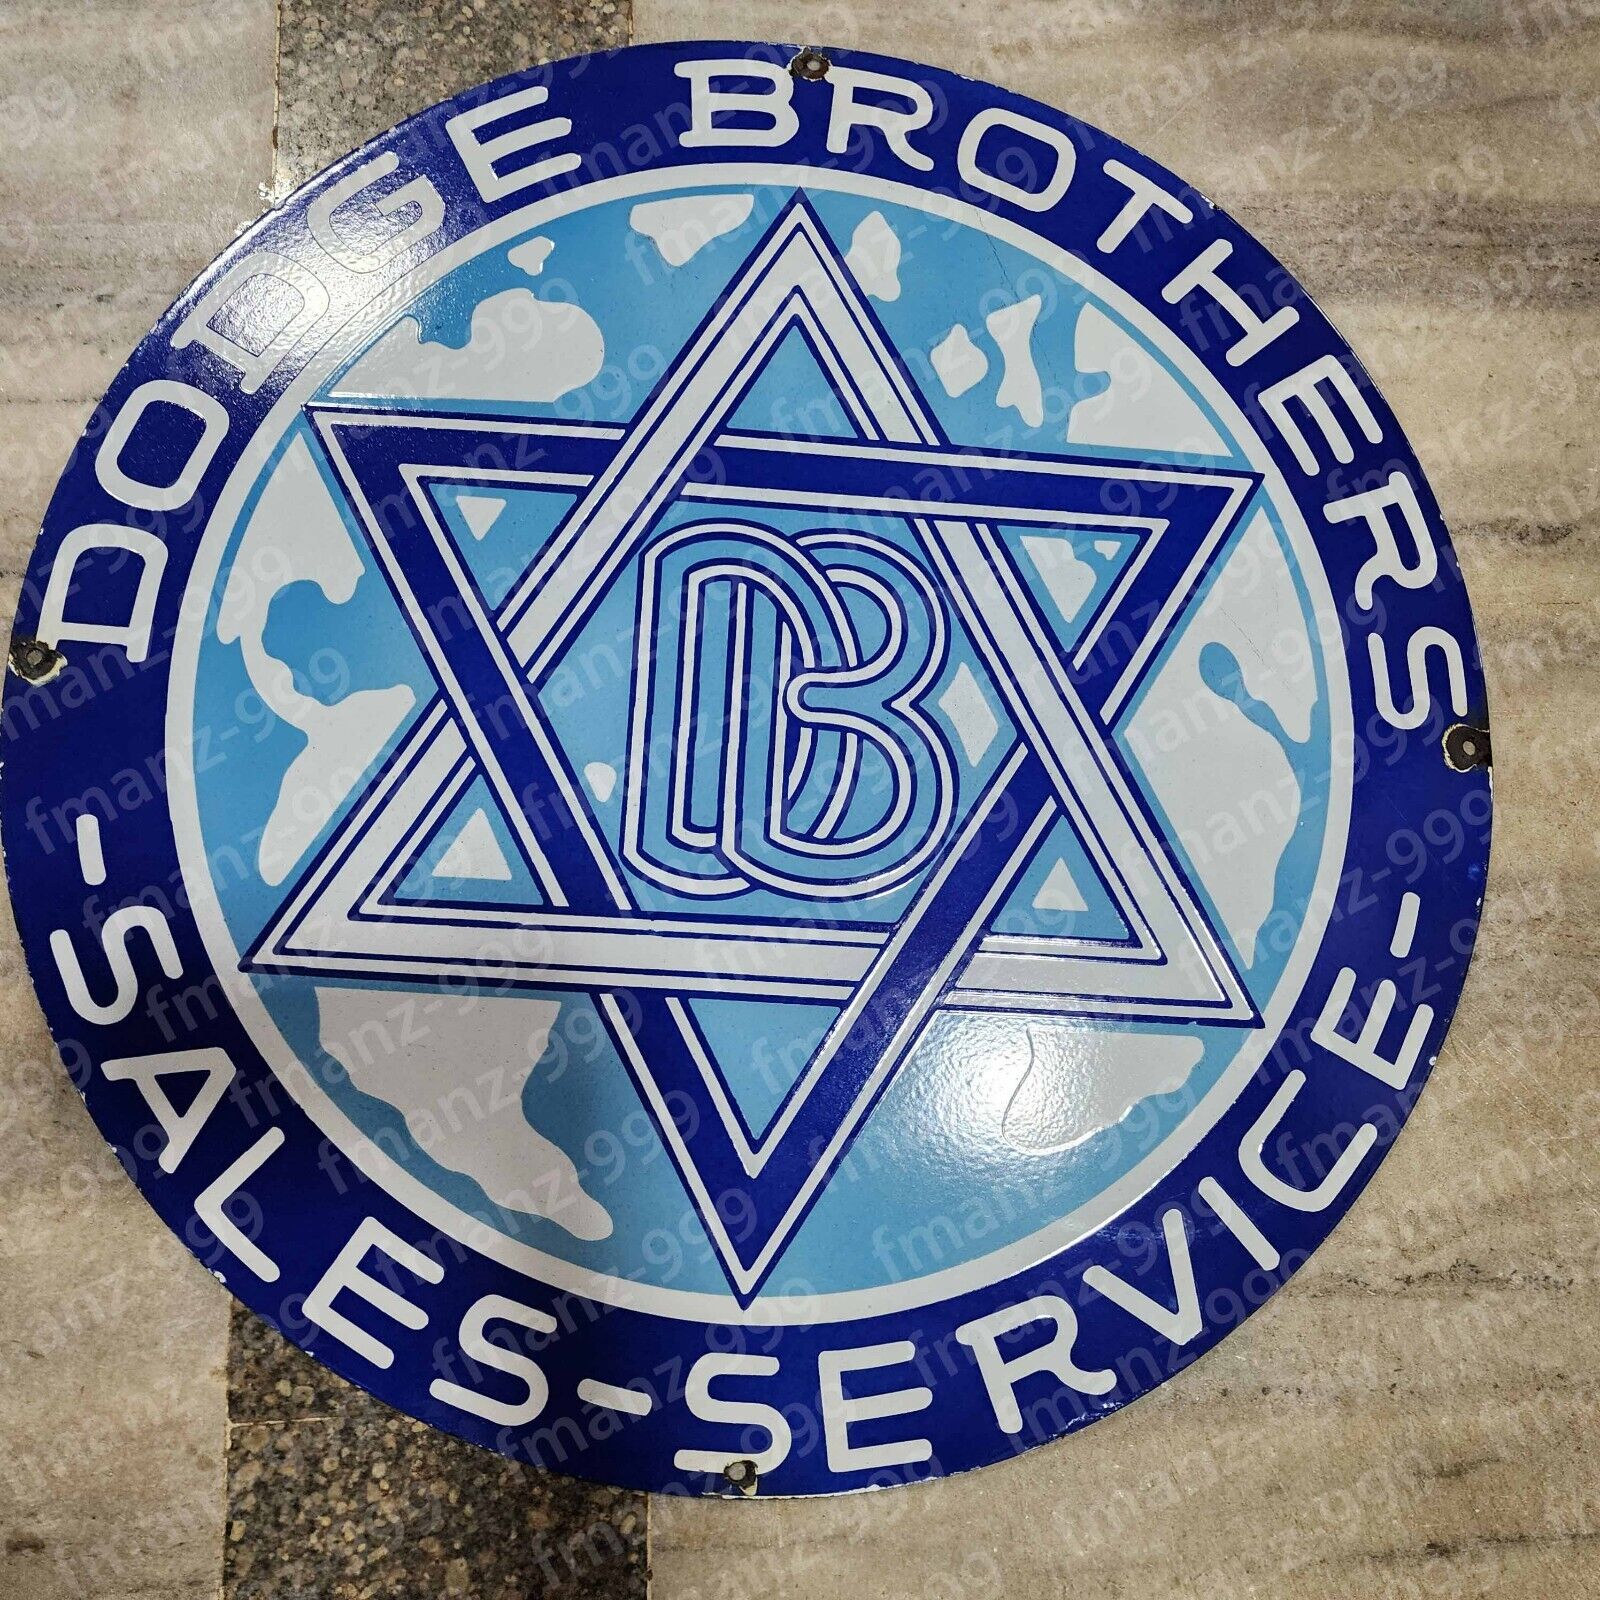 DODGE BROTHERS PORCELAIN ENAMEL SIGN 30 INCHES ROUND